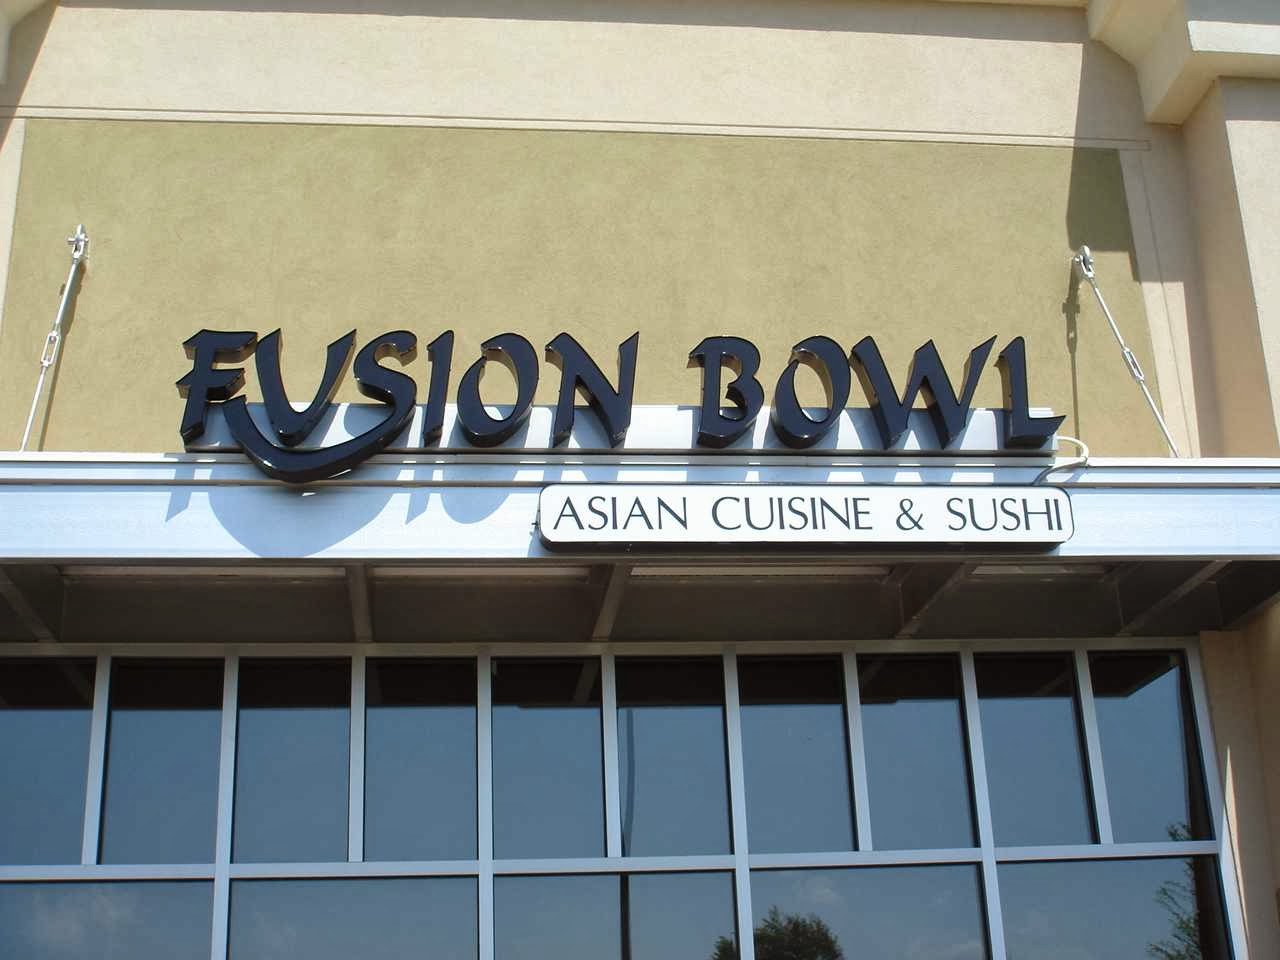 Fusion Bowl Asian bistro and sushi